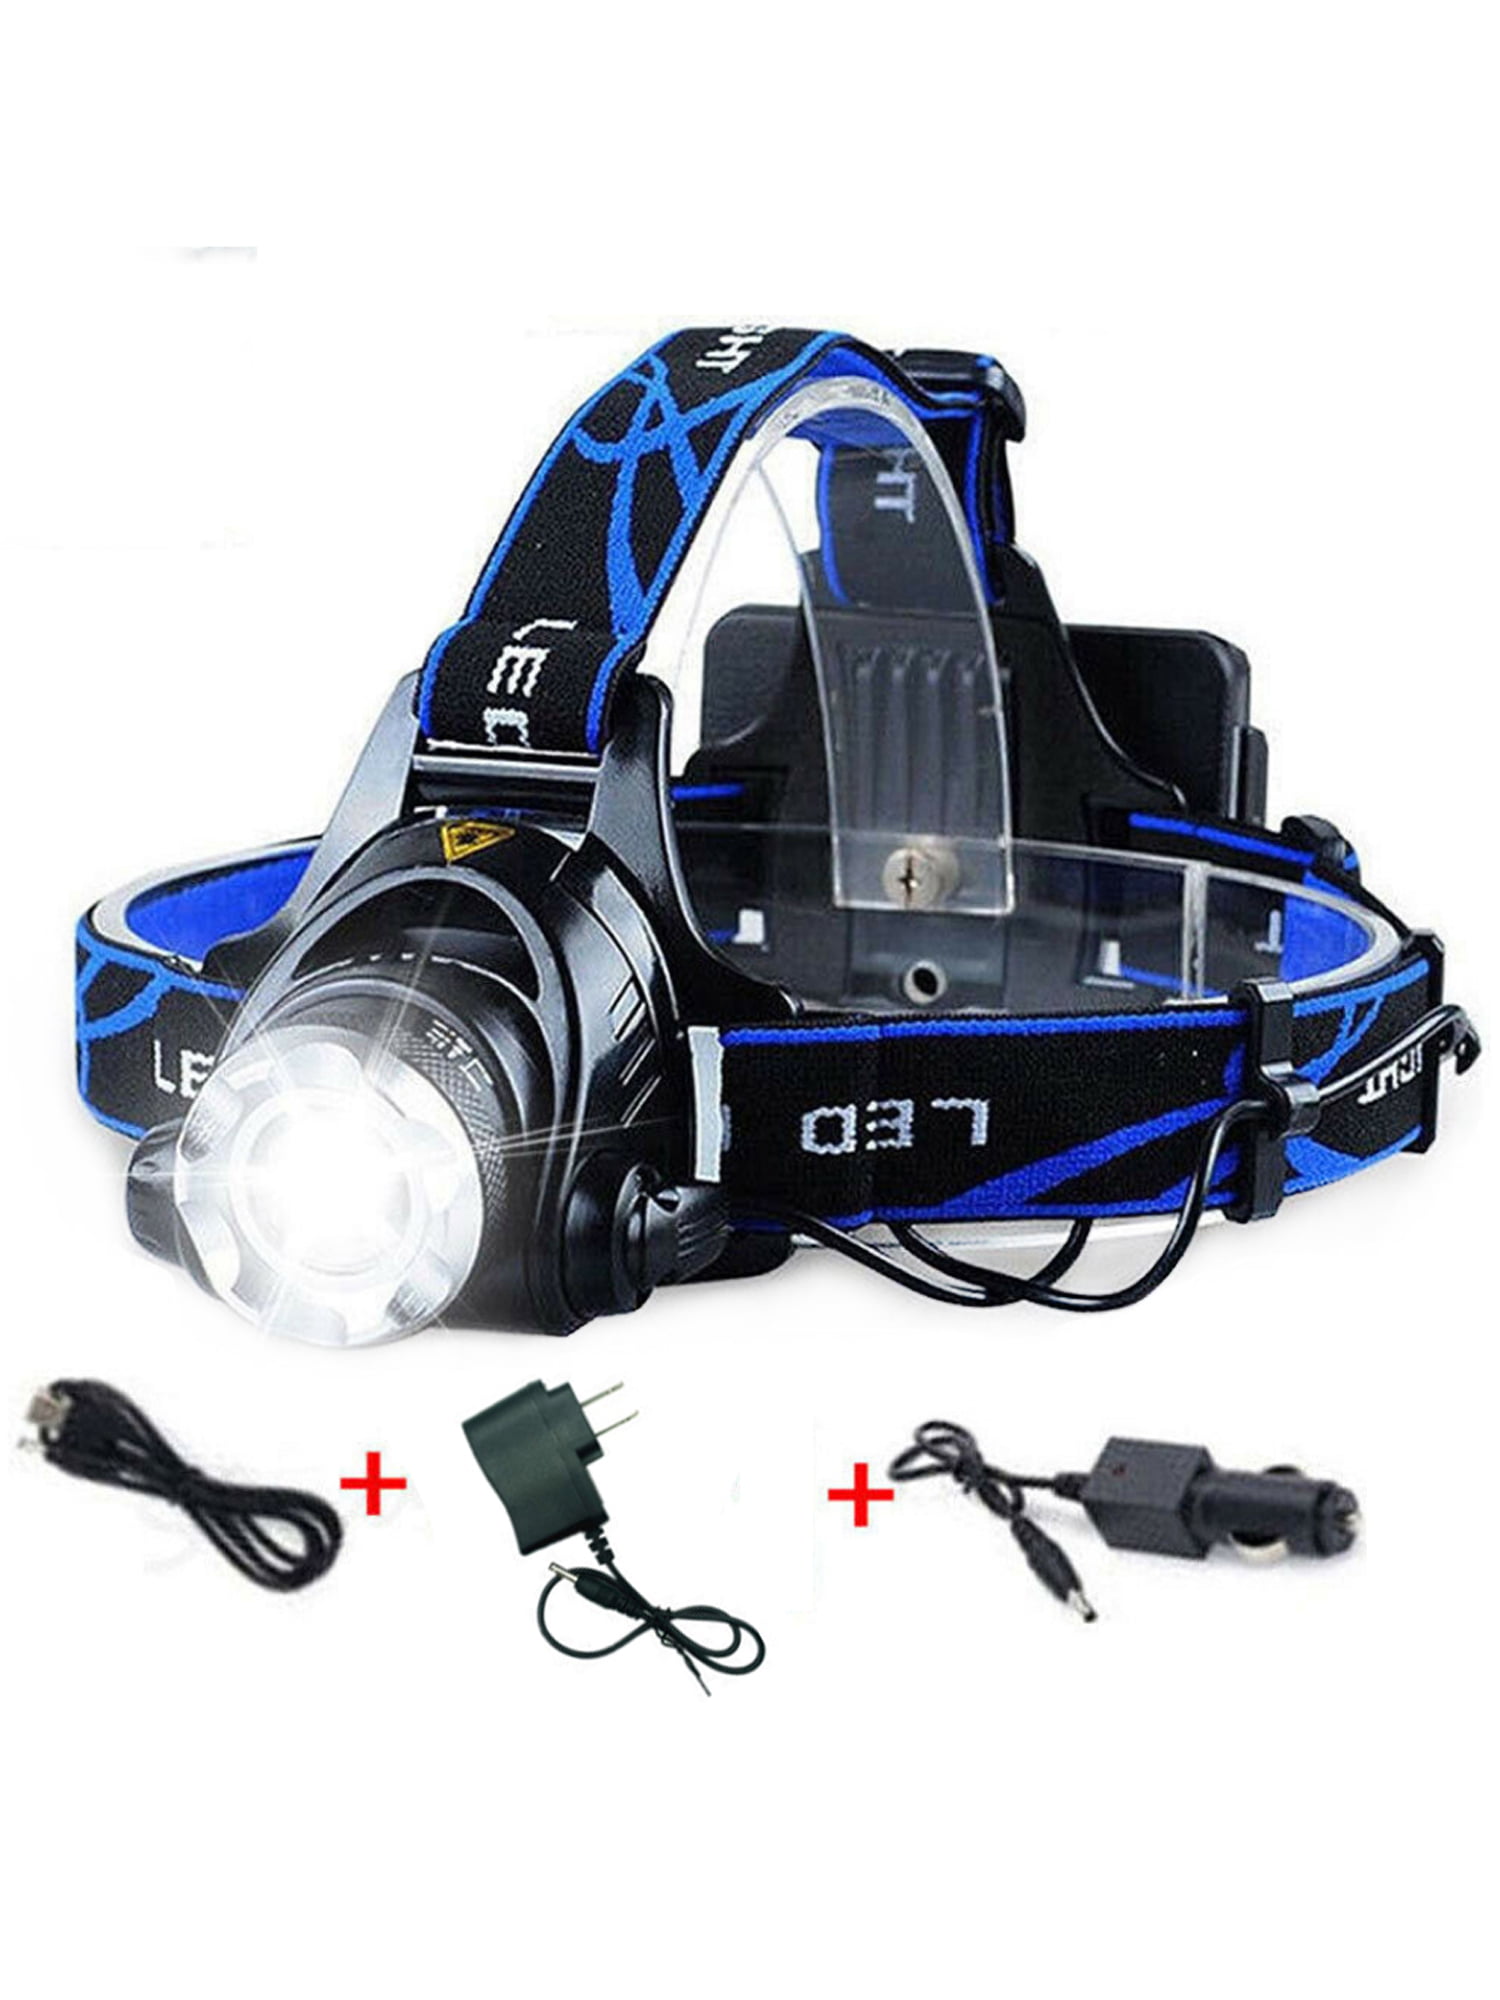 Details about  / 990000Lumen LED USB Headlight Zoom Flashlight Rechargeable Lamp+Battery+Charger